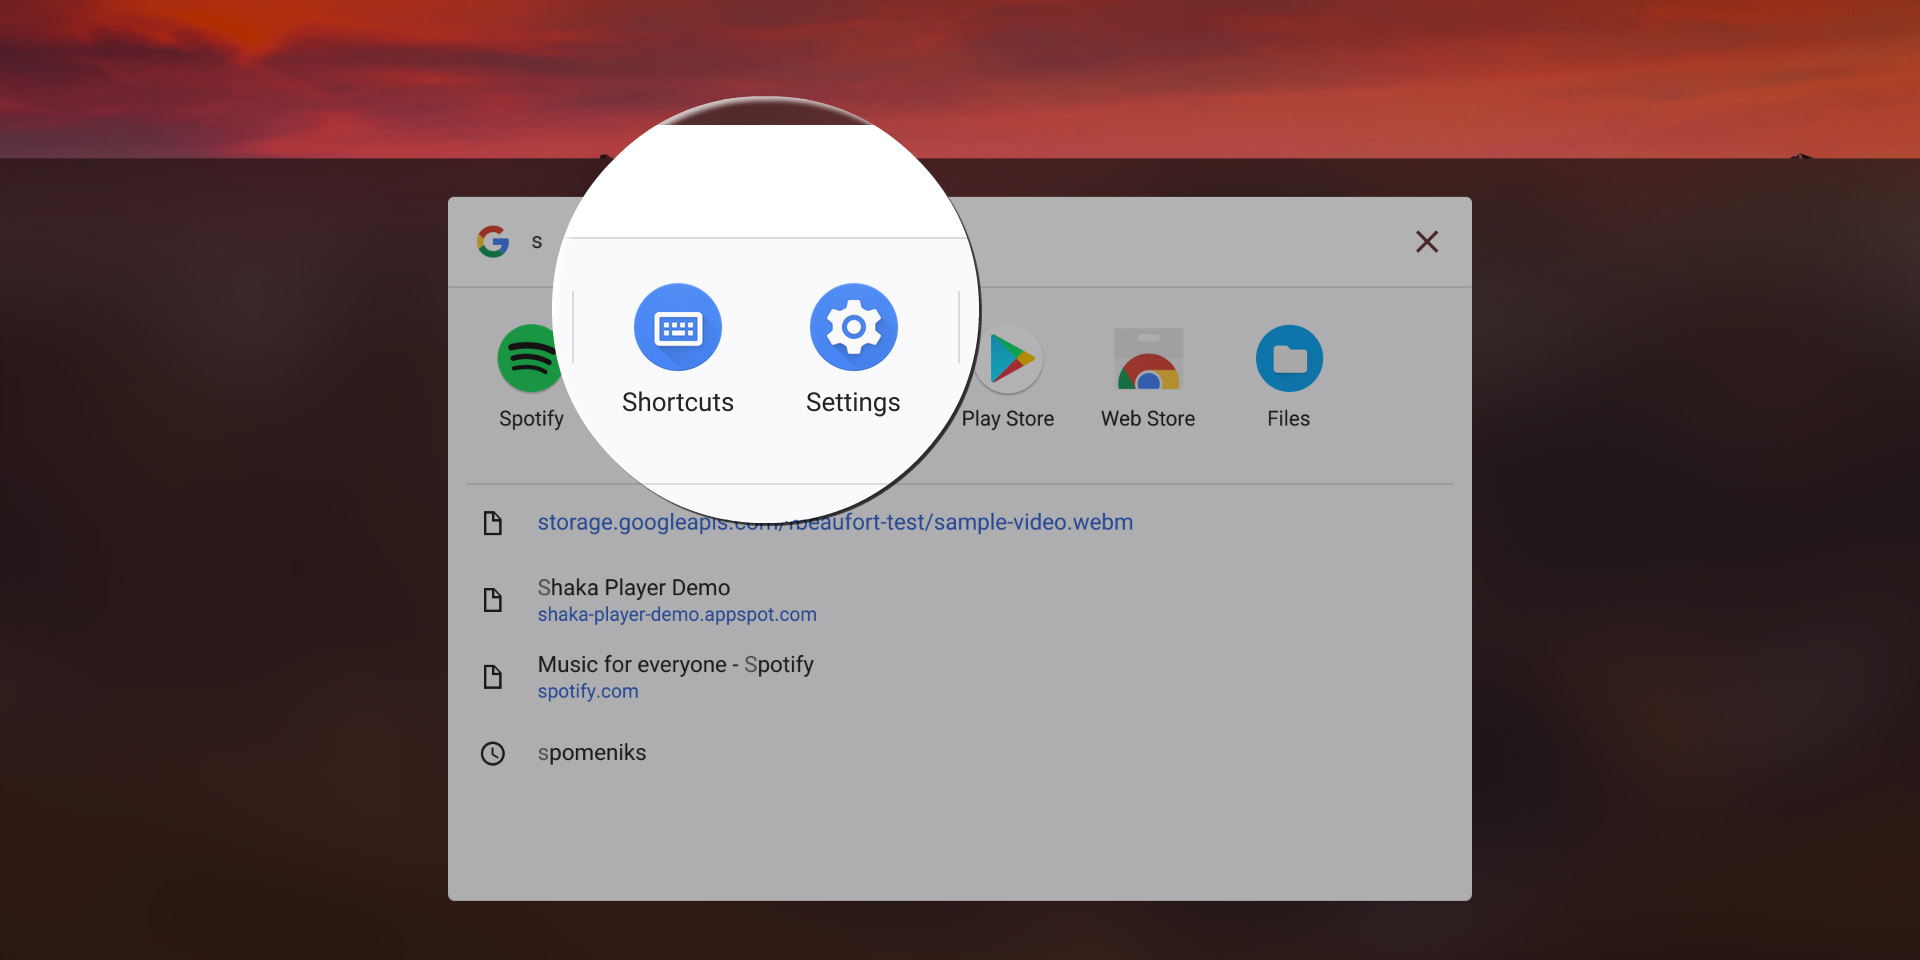 Chrome OS adds access to settings menu and shortcuts through search launcher - 9to5Google1920 x 960